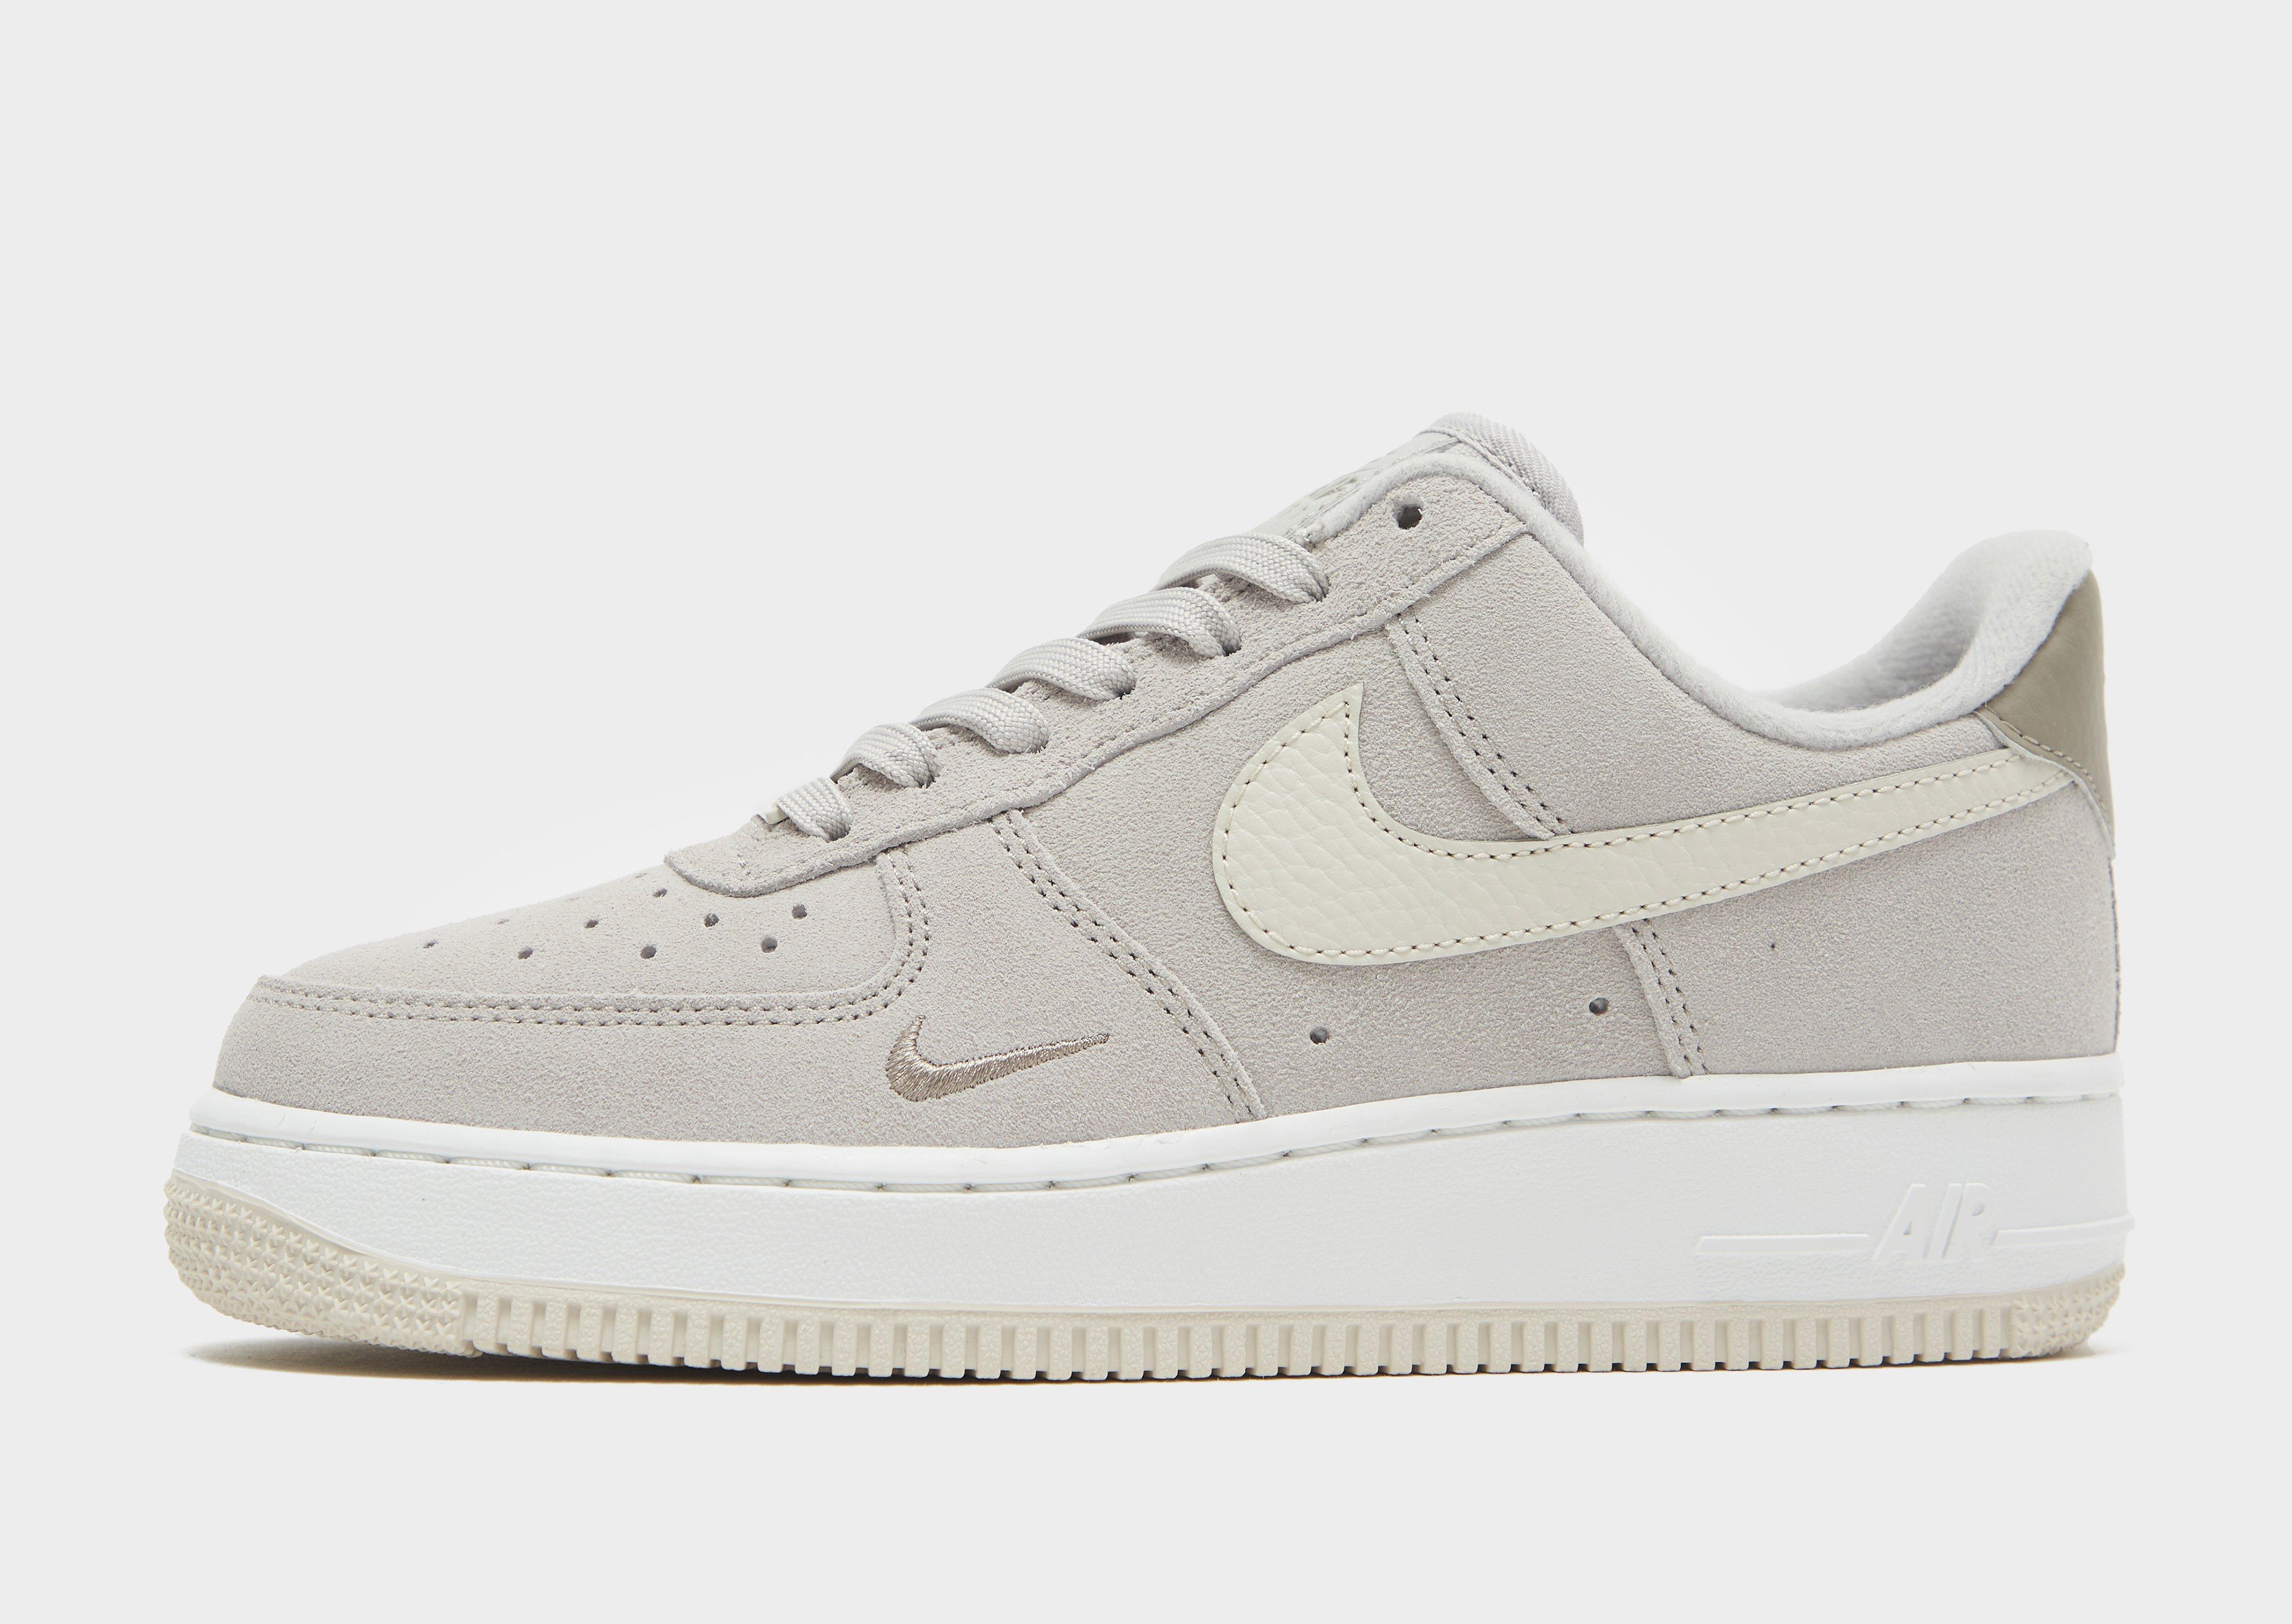 Entertain Gym Posterity White Nike Air Force 1 Low Women's | JD Sports Global